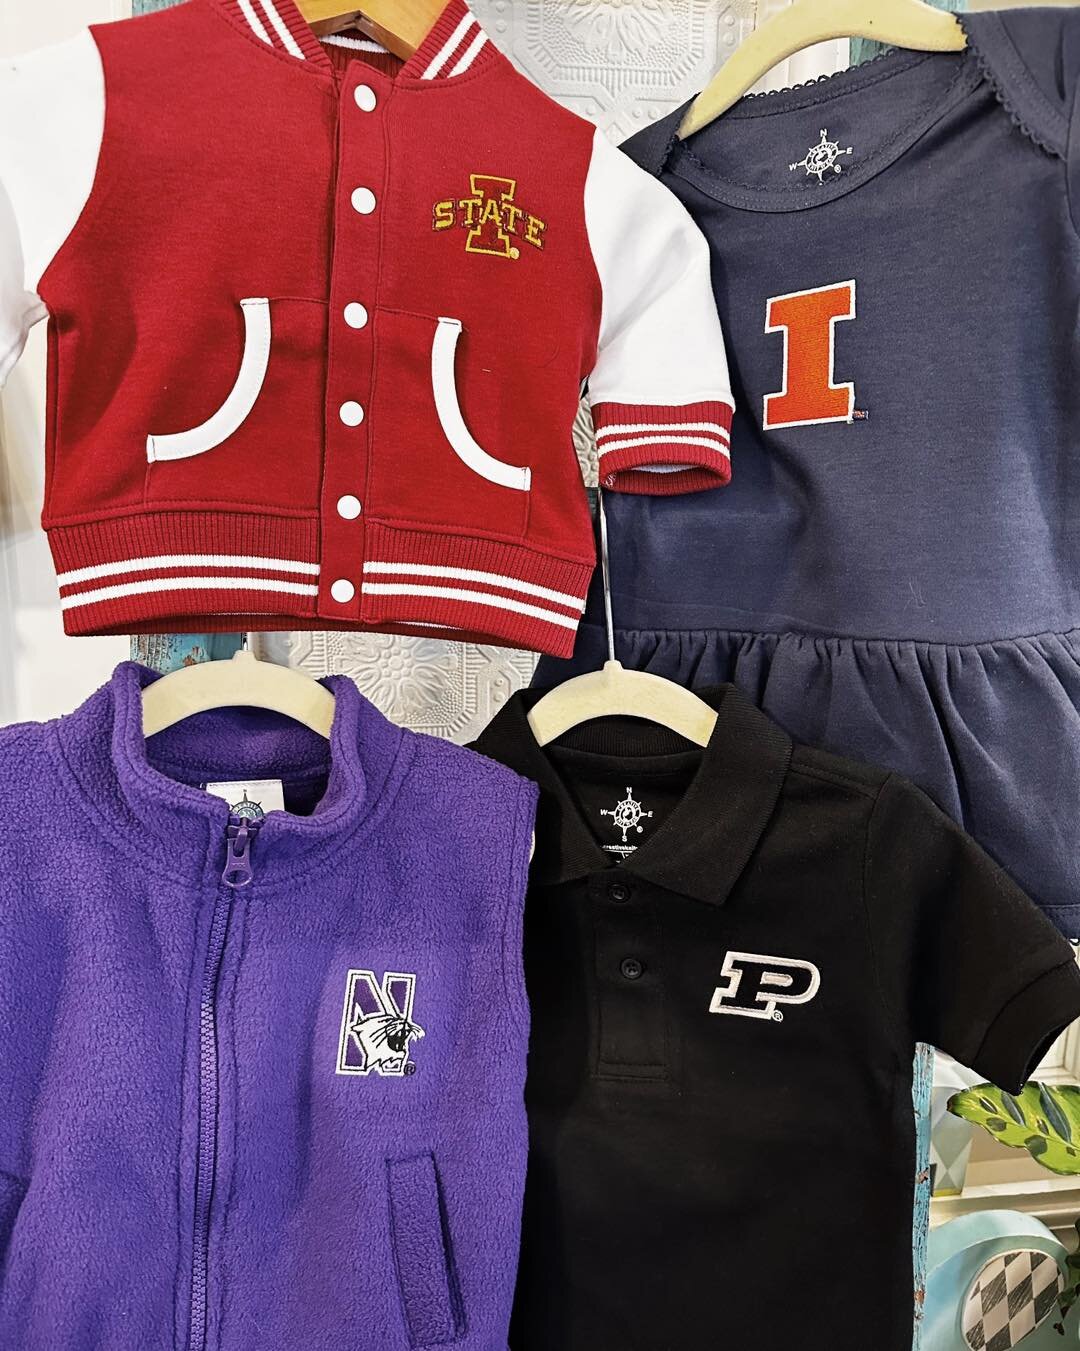 Who are you cheering for this week? Let us know in the comments! 🏀

P.S. These aren&rsquo;t the only schools represented at A Baby Naturally! They are just the only ones that fit in the photo 😉